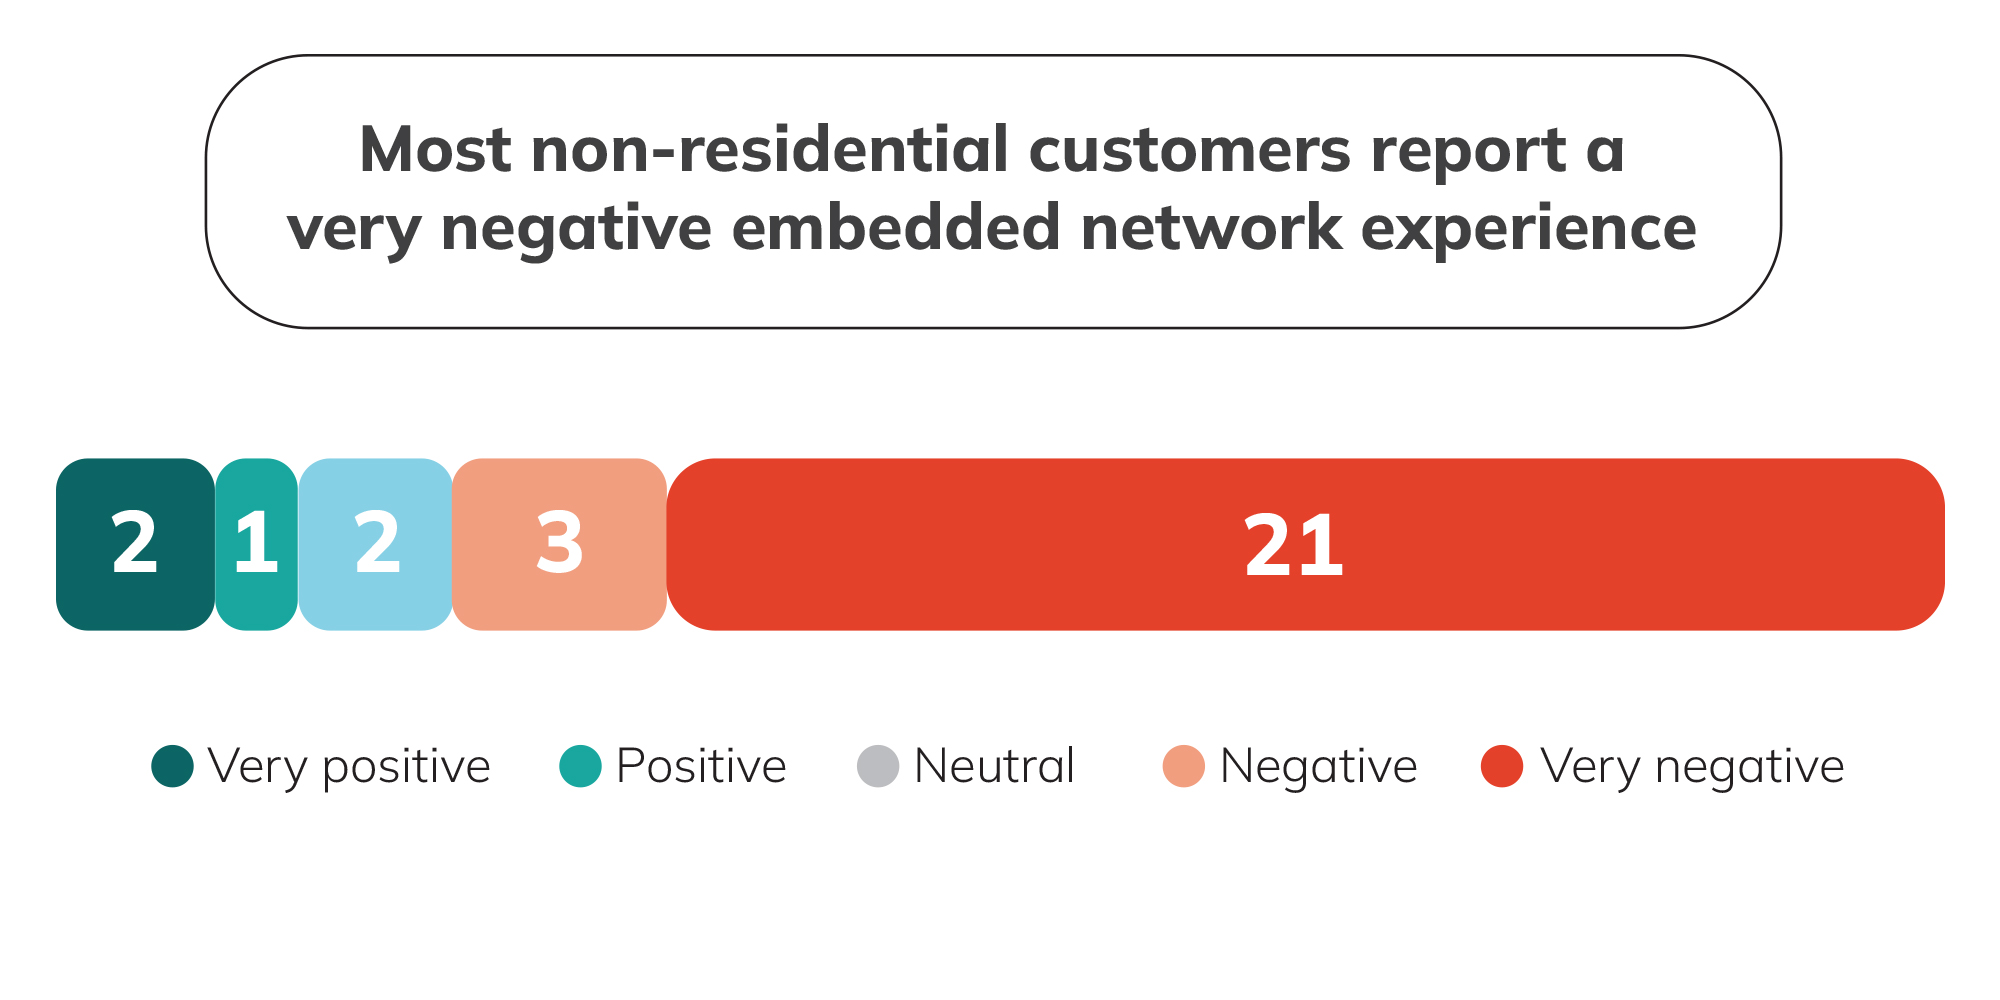 Most non-residential customers report a very negative embedded network experience